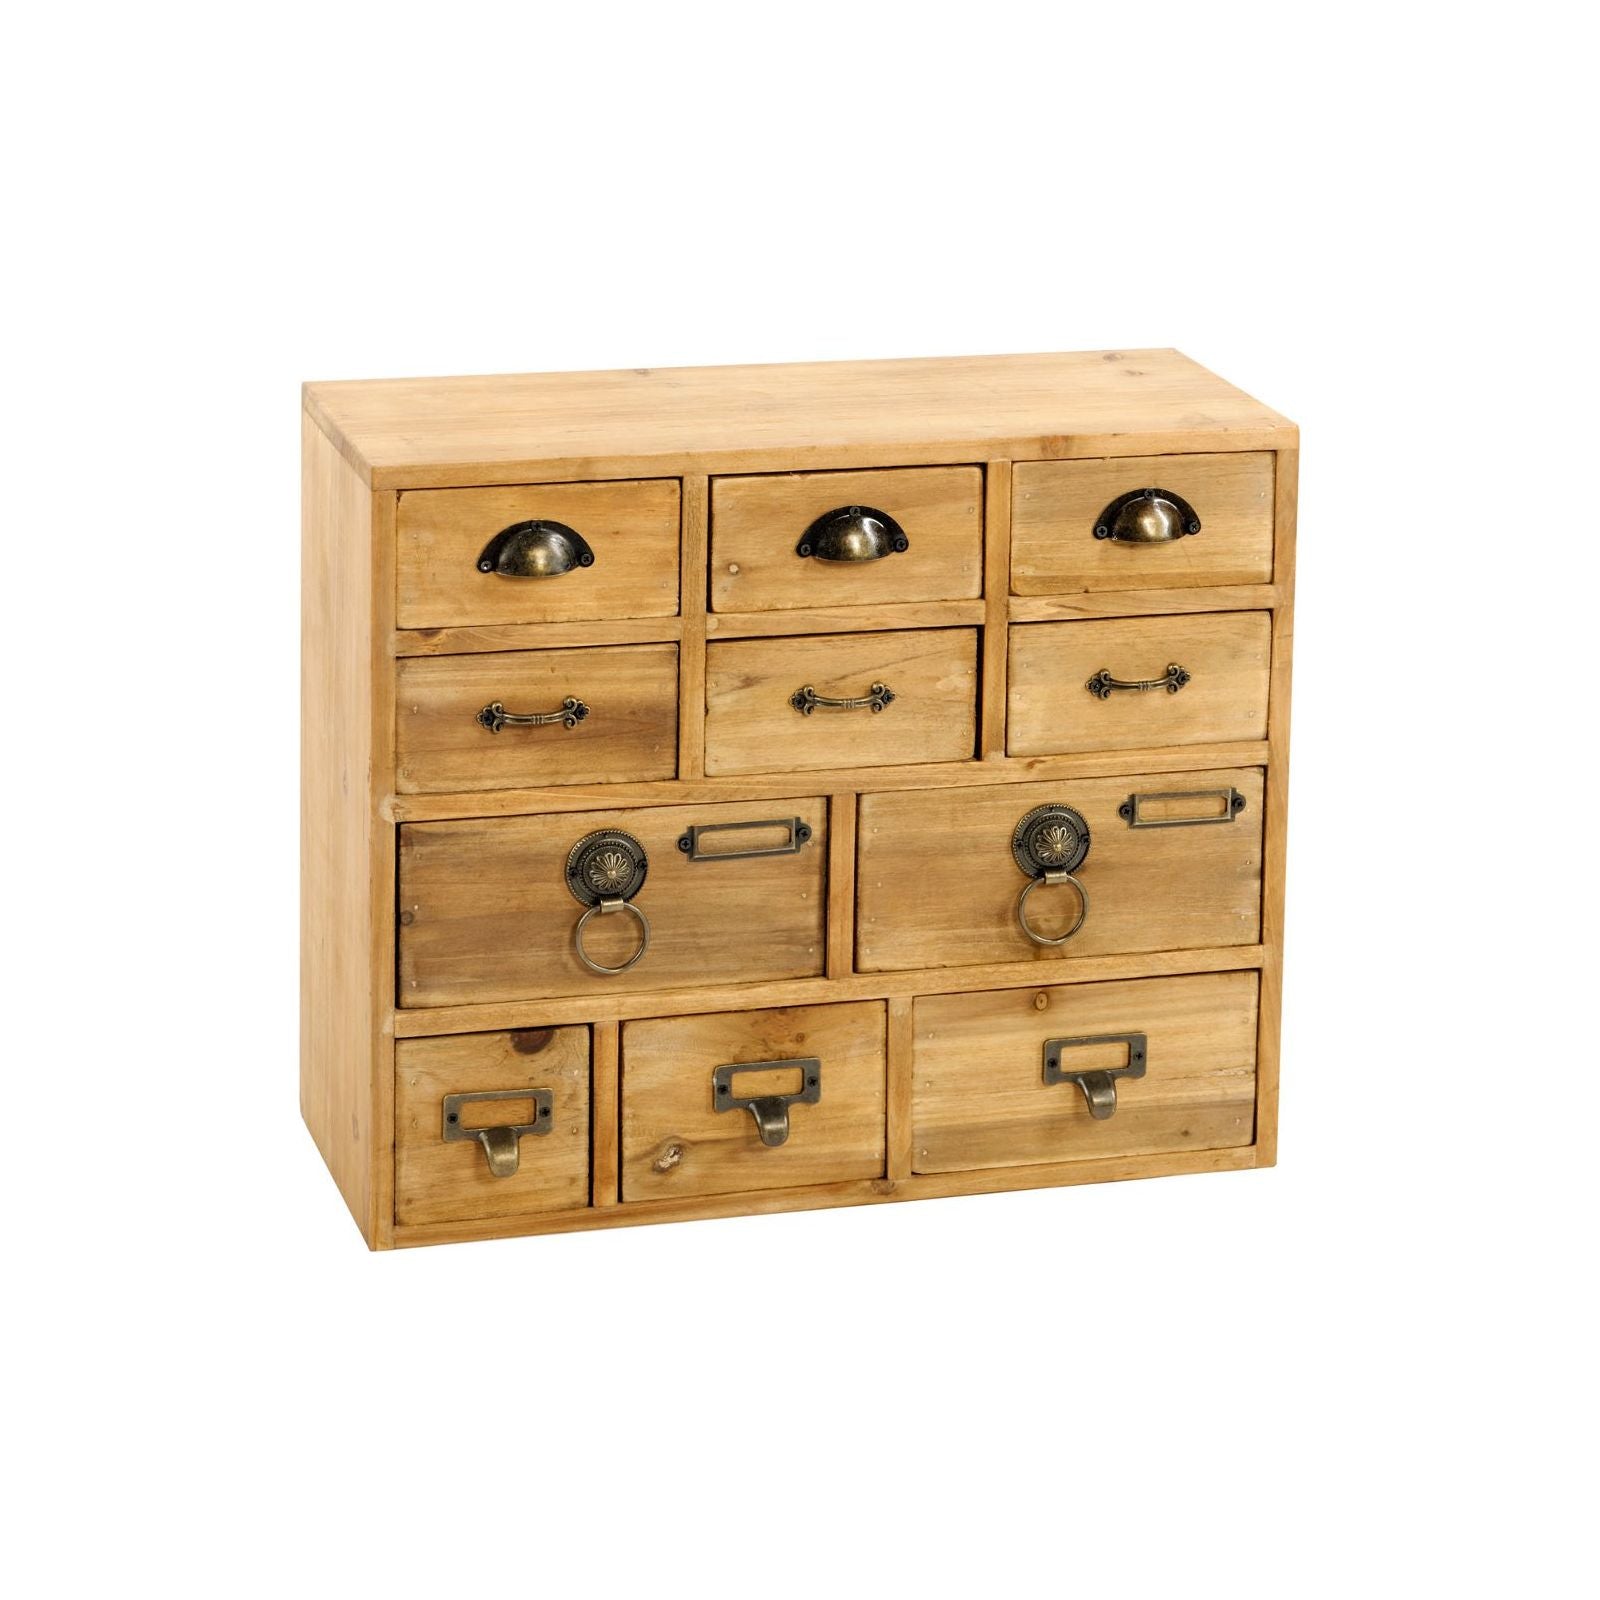 Office Organiser with 11 Drawers of Varying Sizes - Ashton and Finch